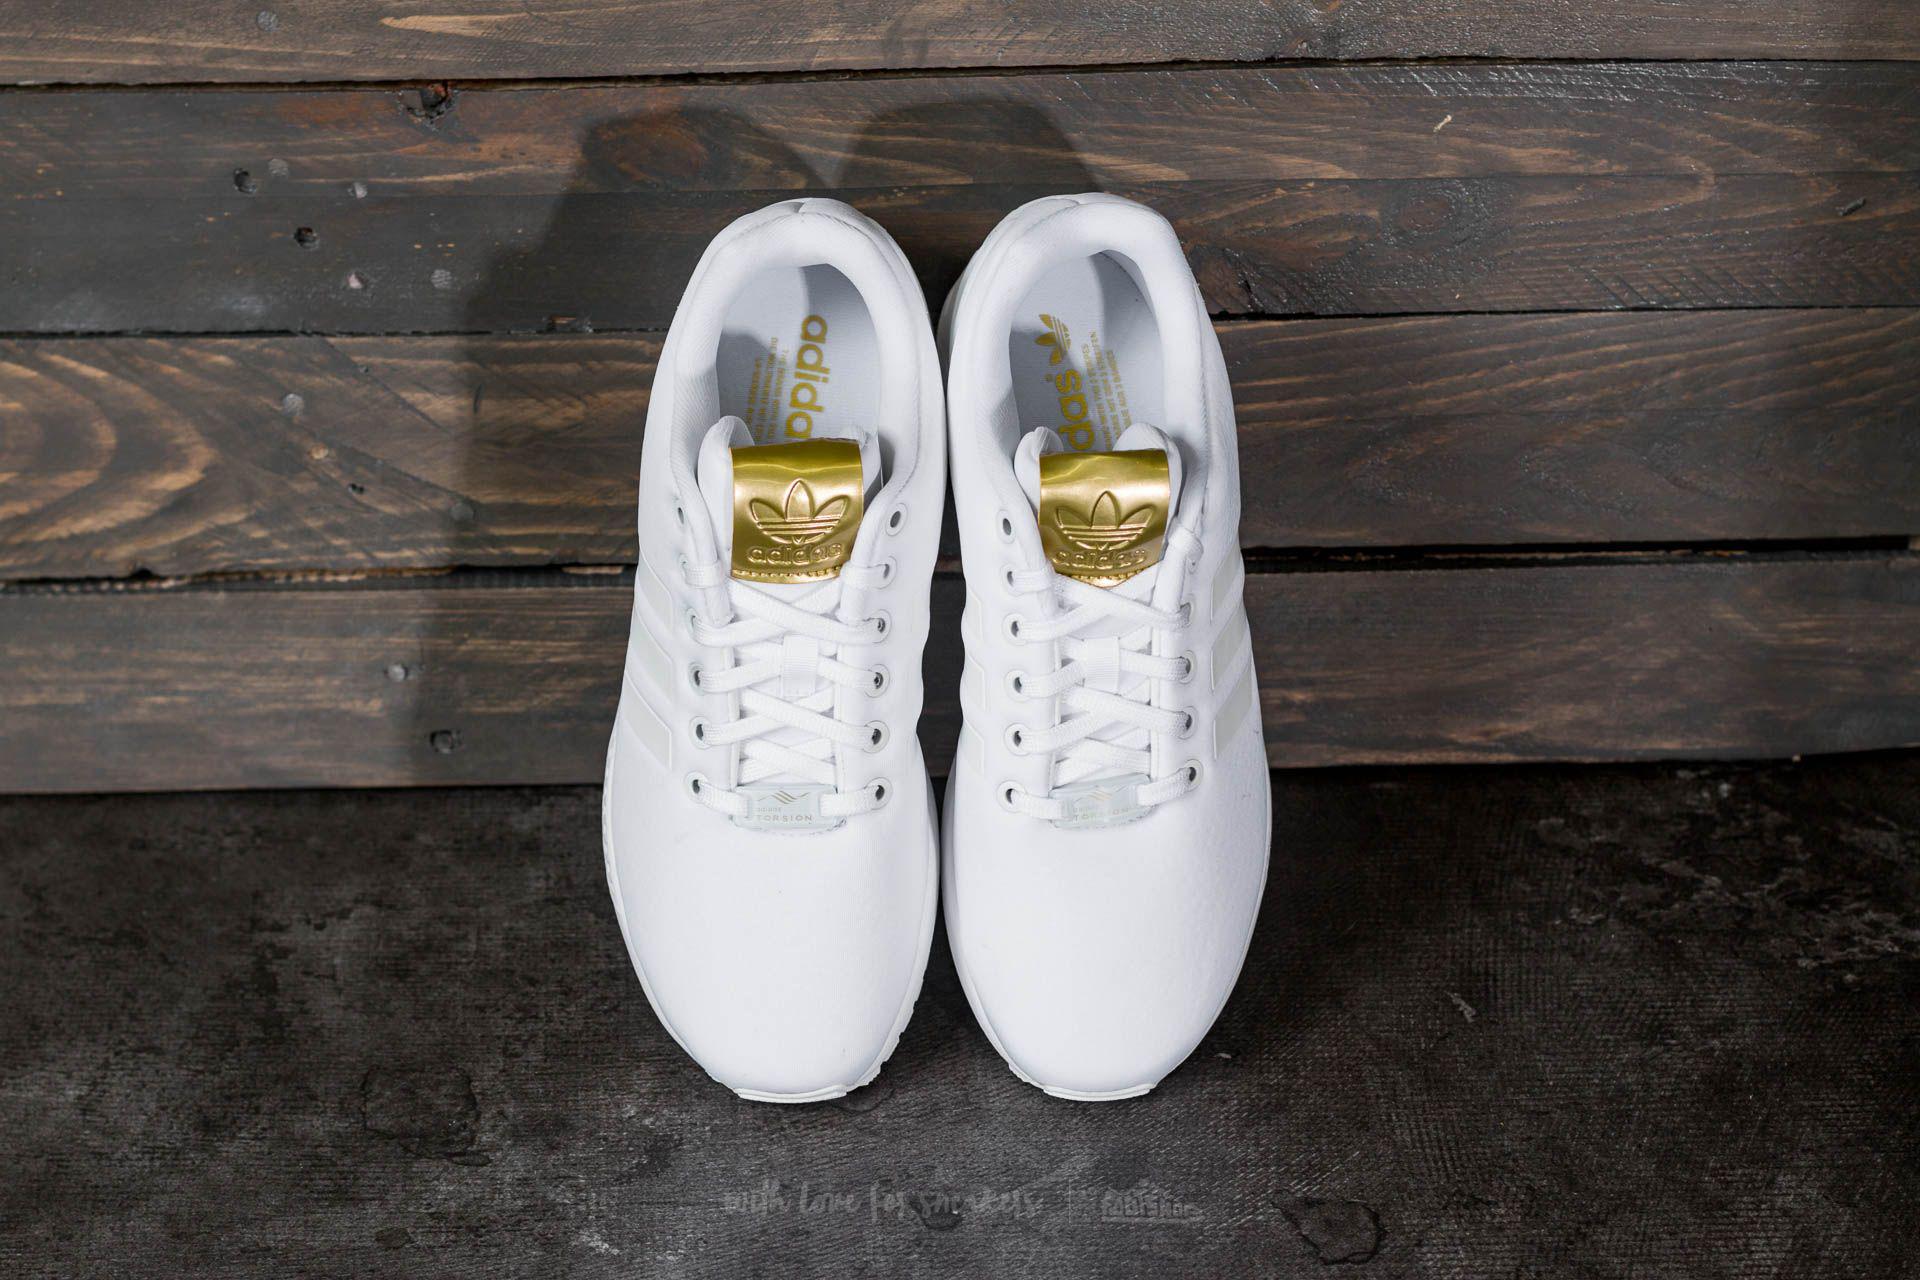 adidas zx flux white and gold, Off 77%, www.scrimaglio.com